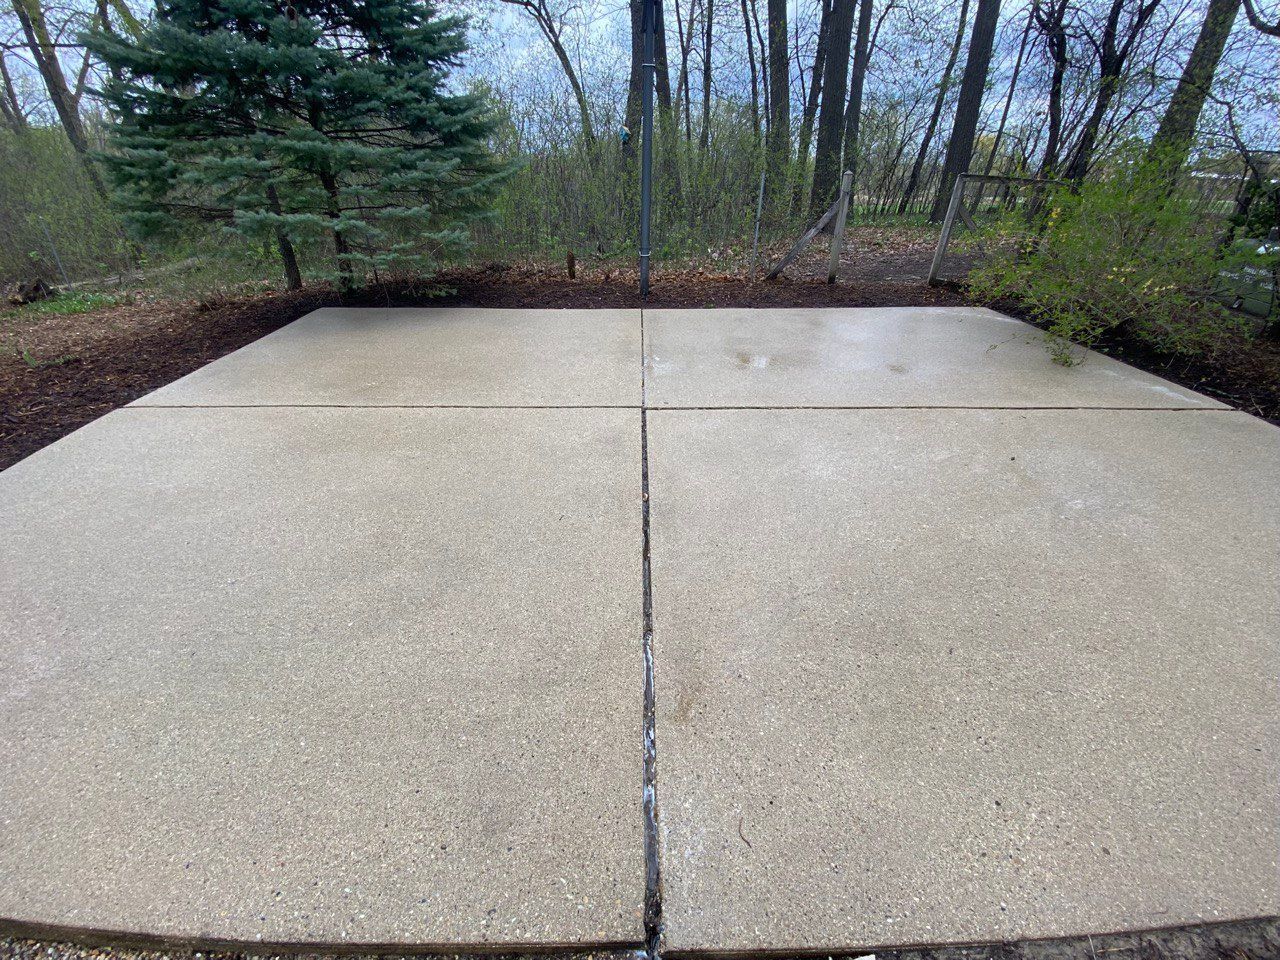 Clean Space - Lake Zurich, IL - Peter’s Power Wash Services